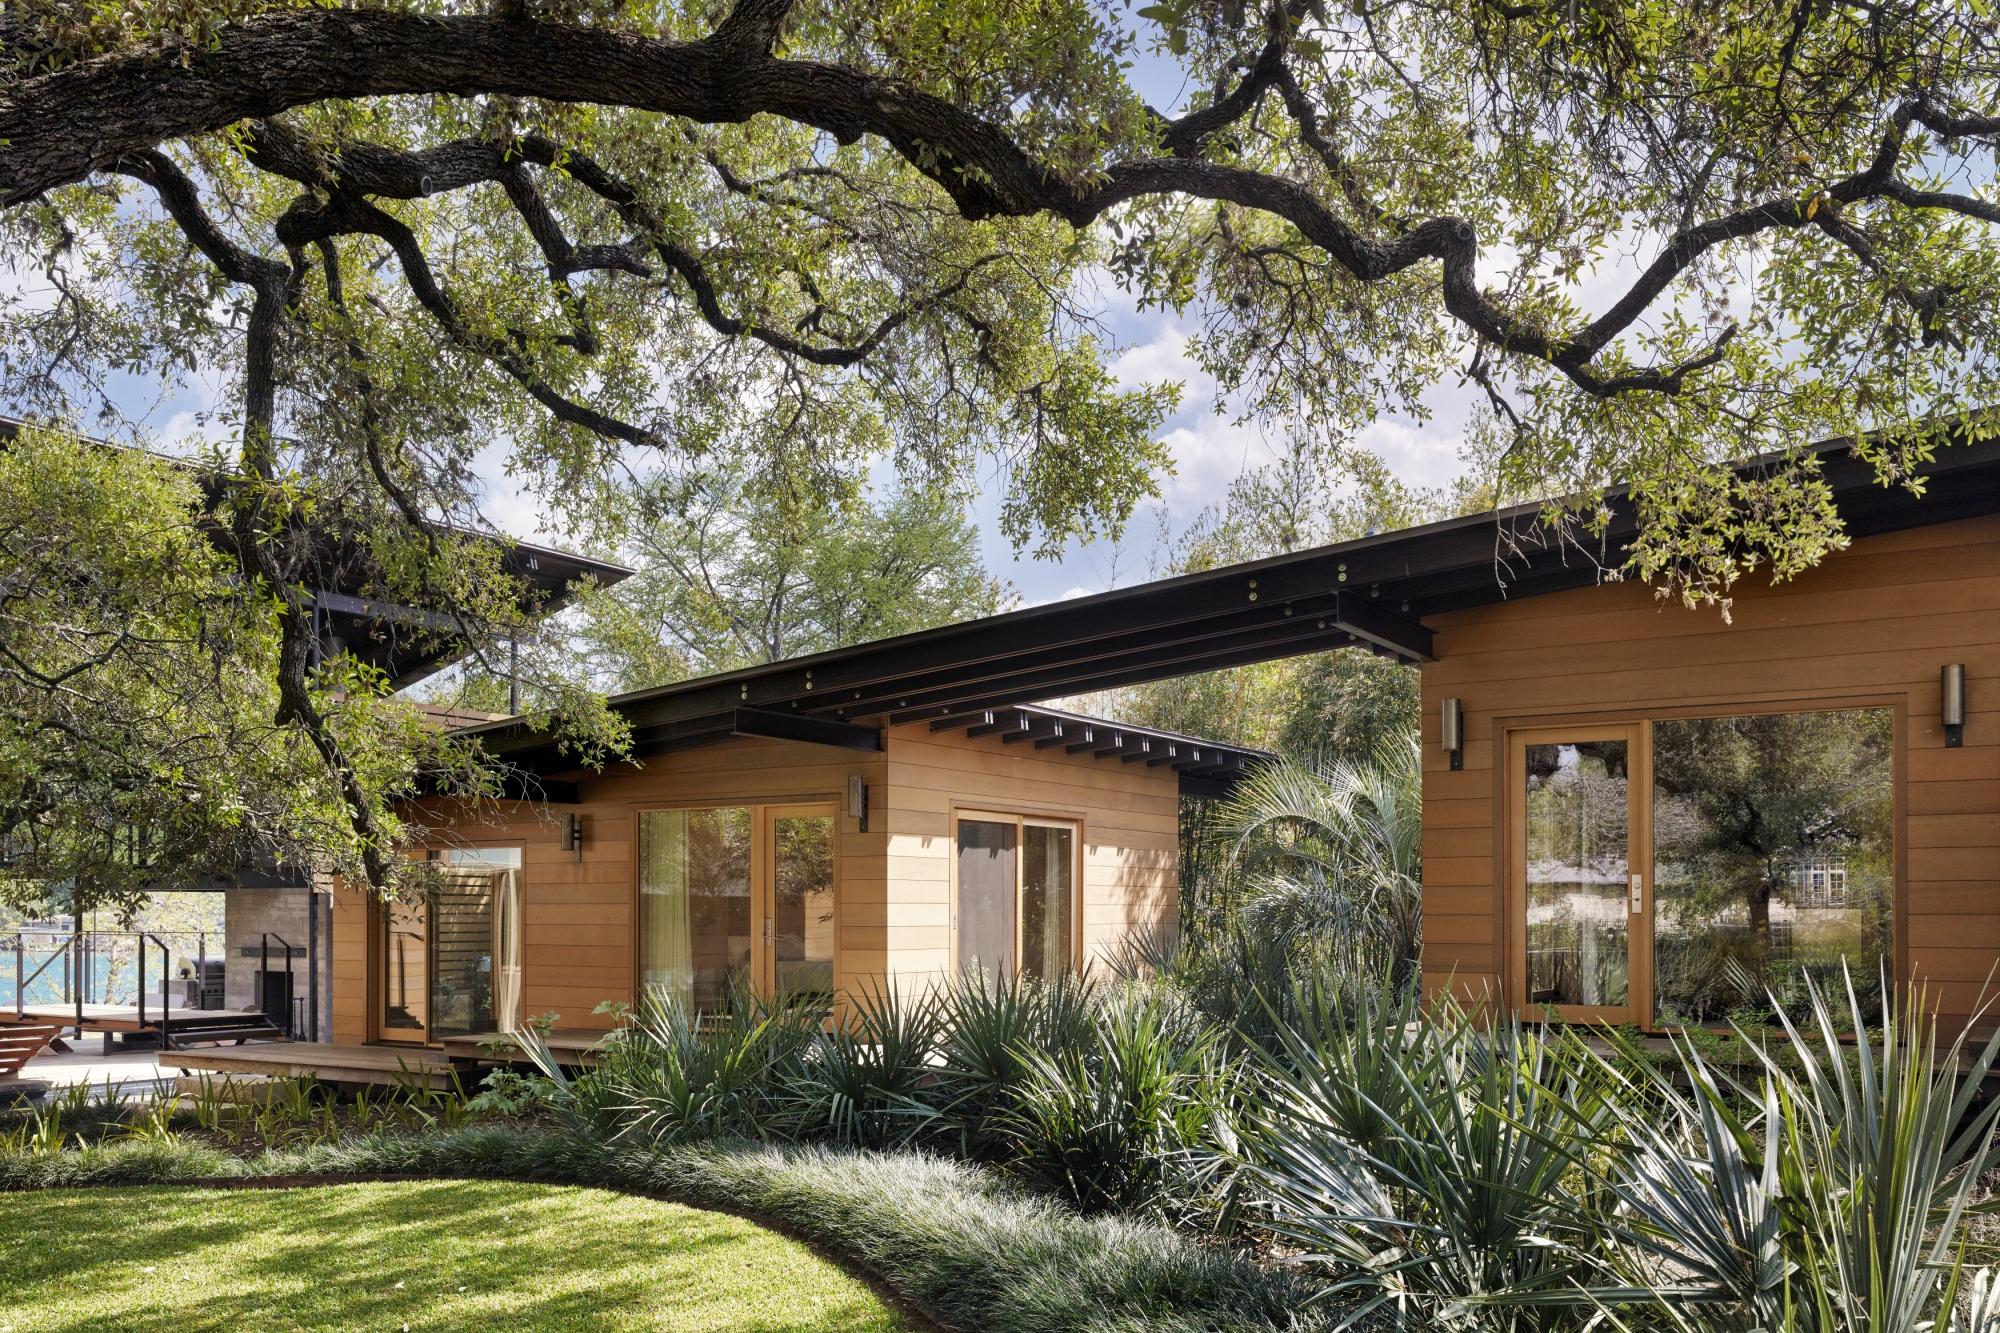 Towering heritage oak trees shade the front lawn and separate  guest quarters